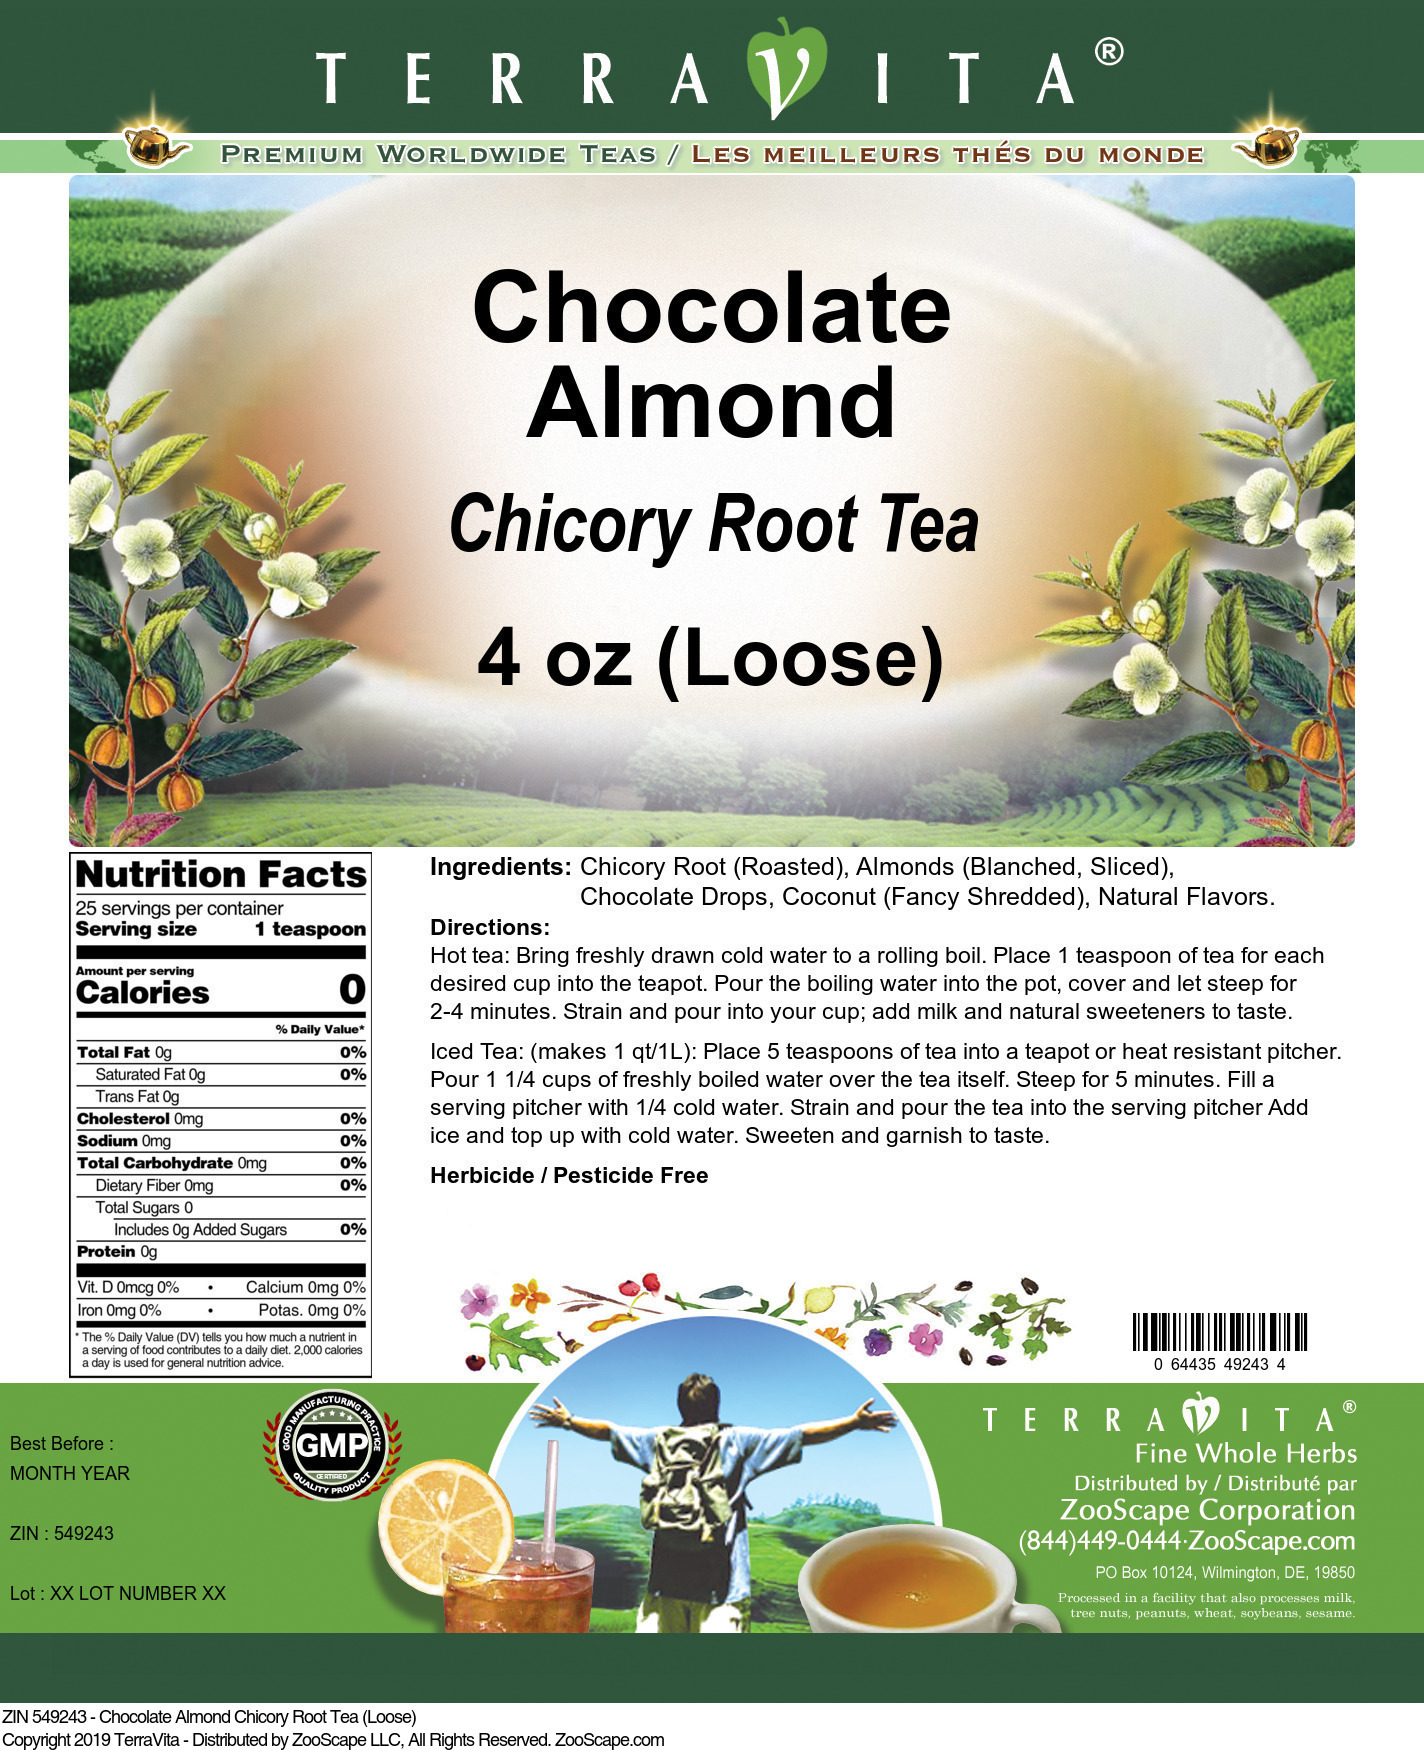 Chocolate Almond Chicory Root Tea (Loose) - Label